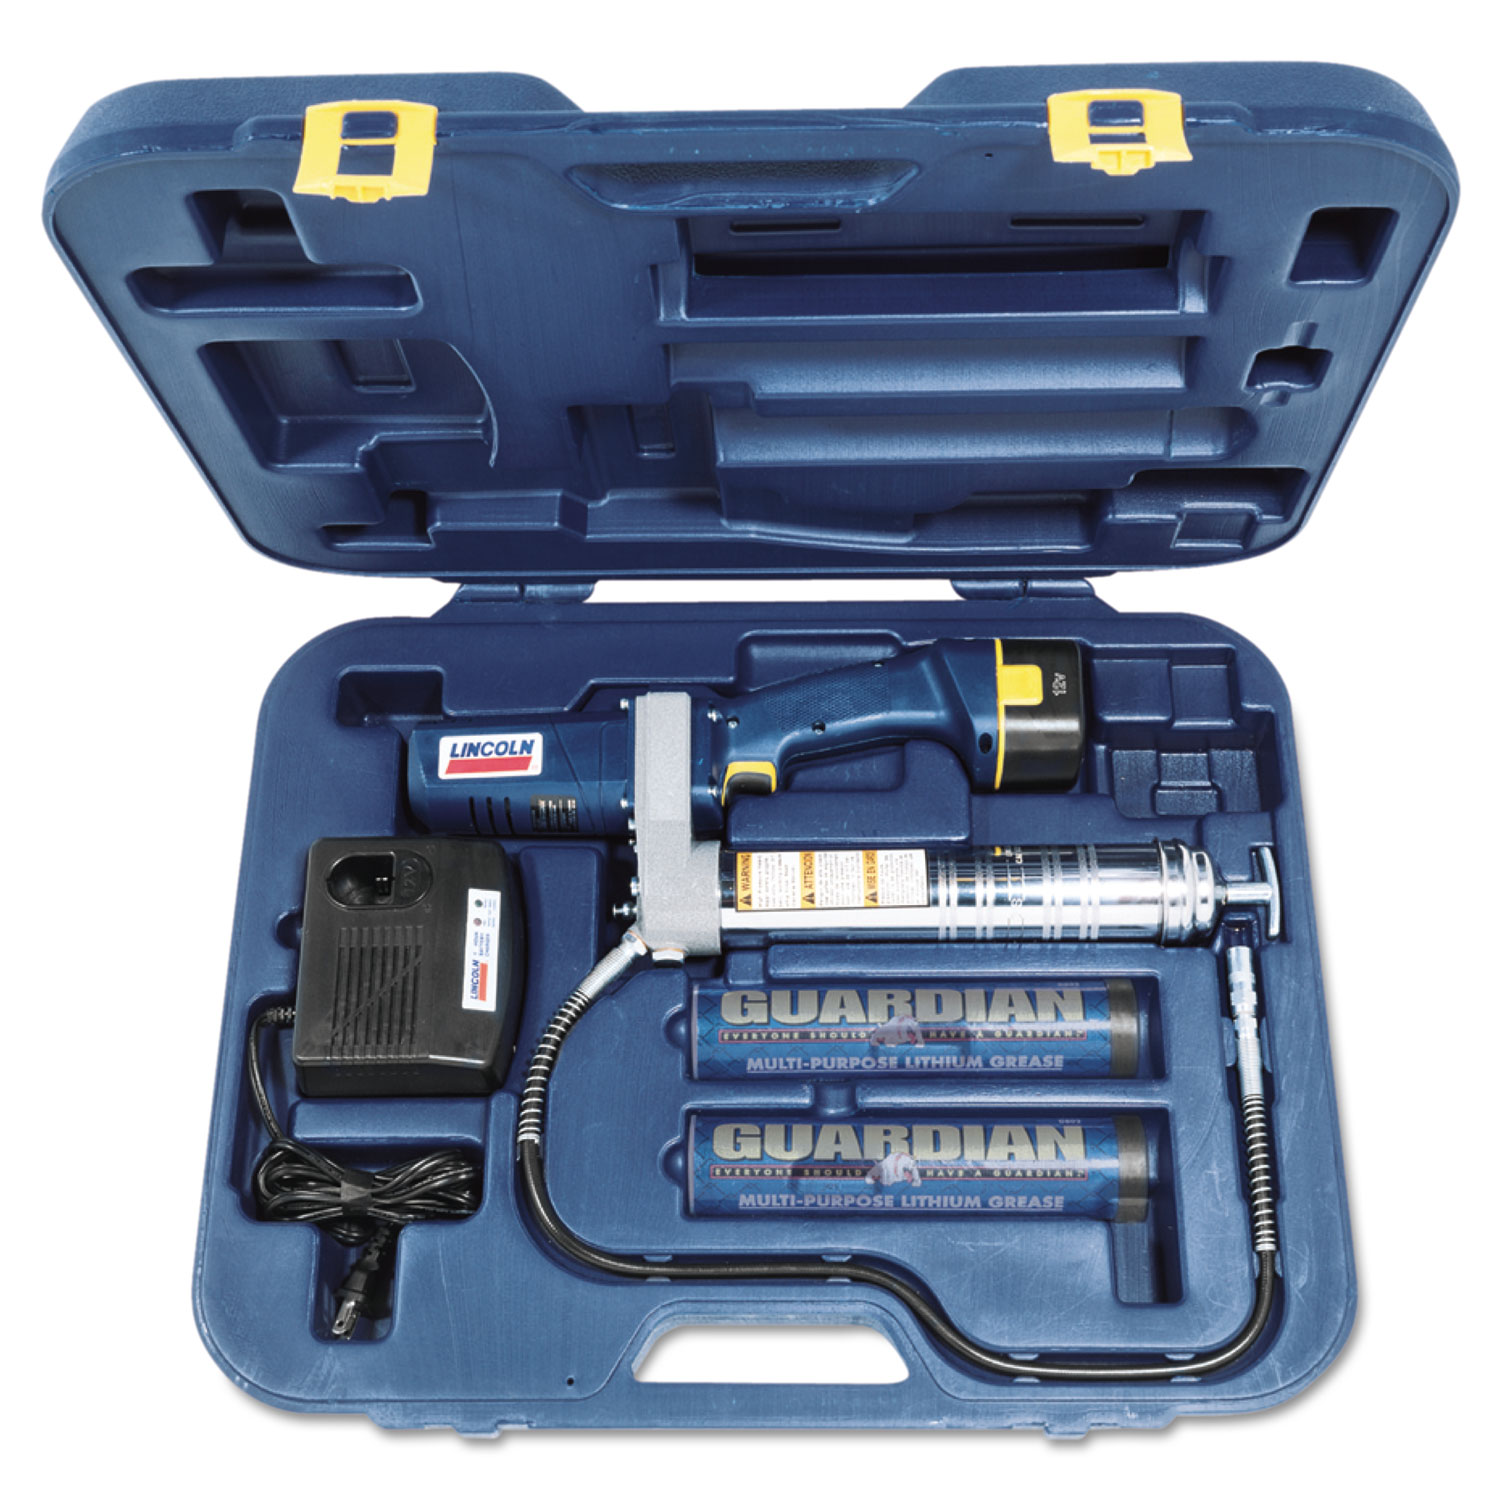 PowerLuber Grease Gun, with Case and Battery